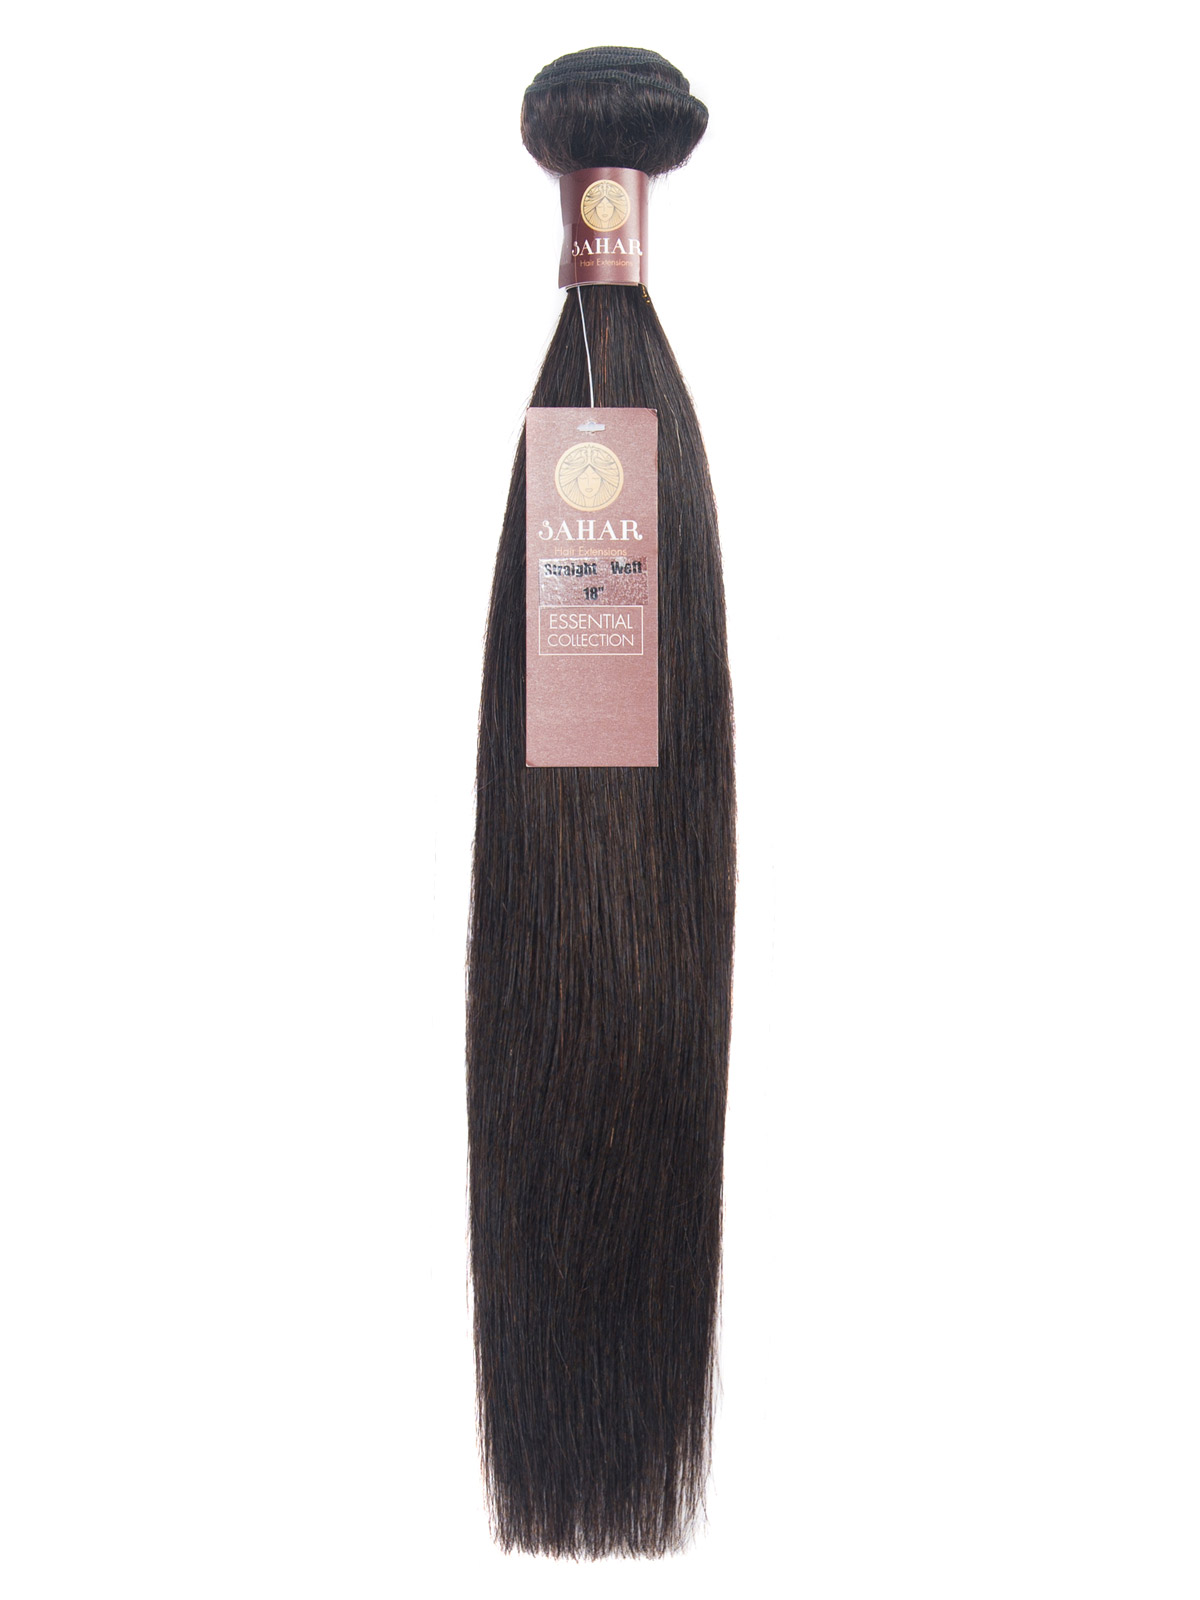 Sahar Essential Virgin Remy Human Hair Extensions 100g 8a Straight Pink Pastel 14 Inch